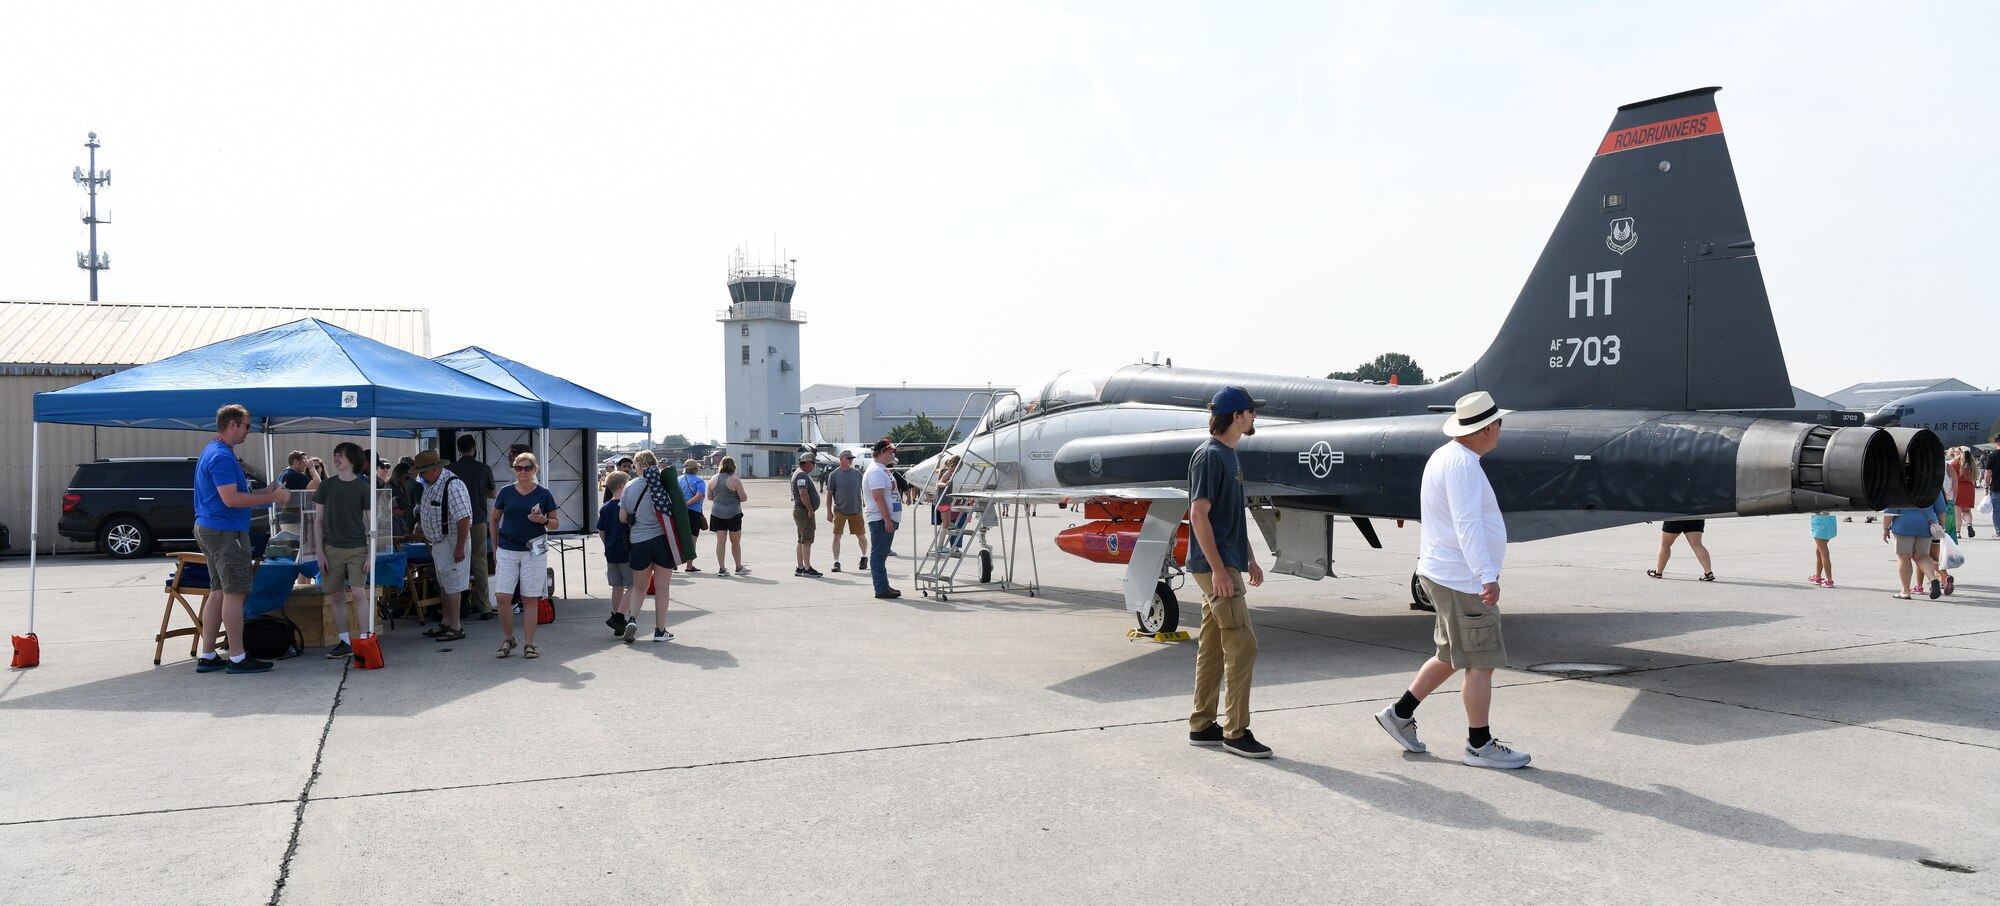 People walking by airplane at air show